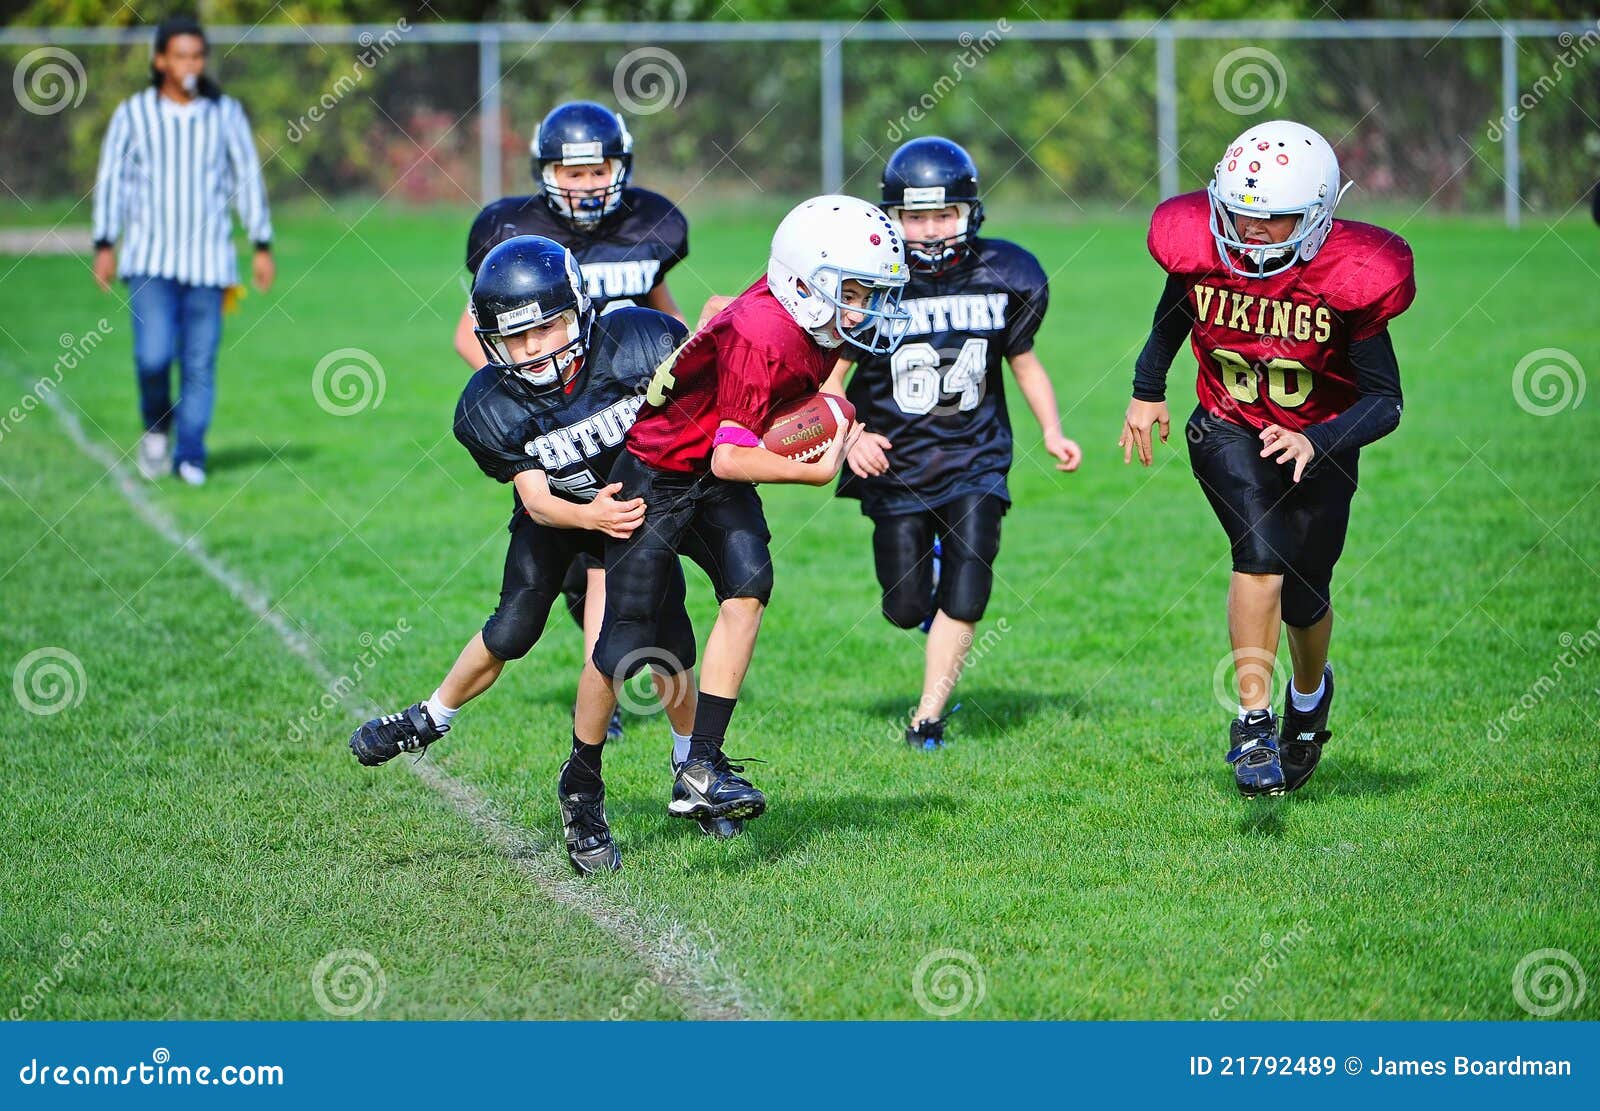 Youth American Football Out Of Bounds Editorial Stock Image - Image